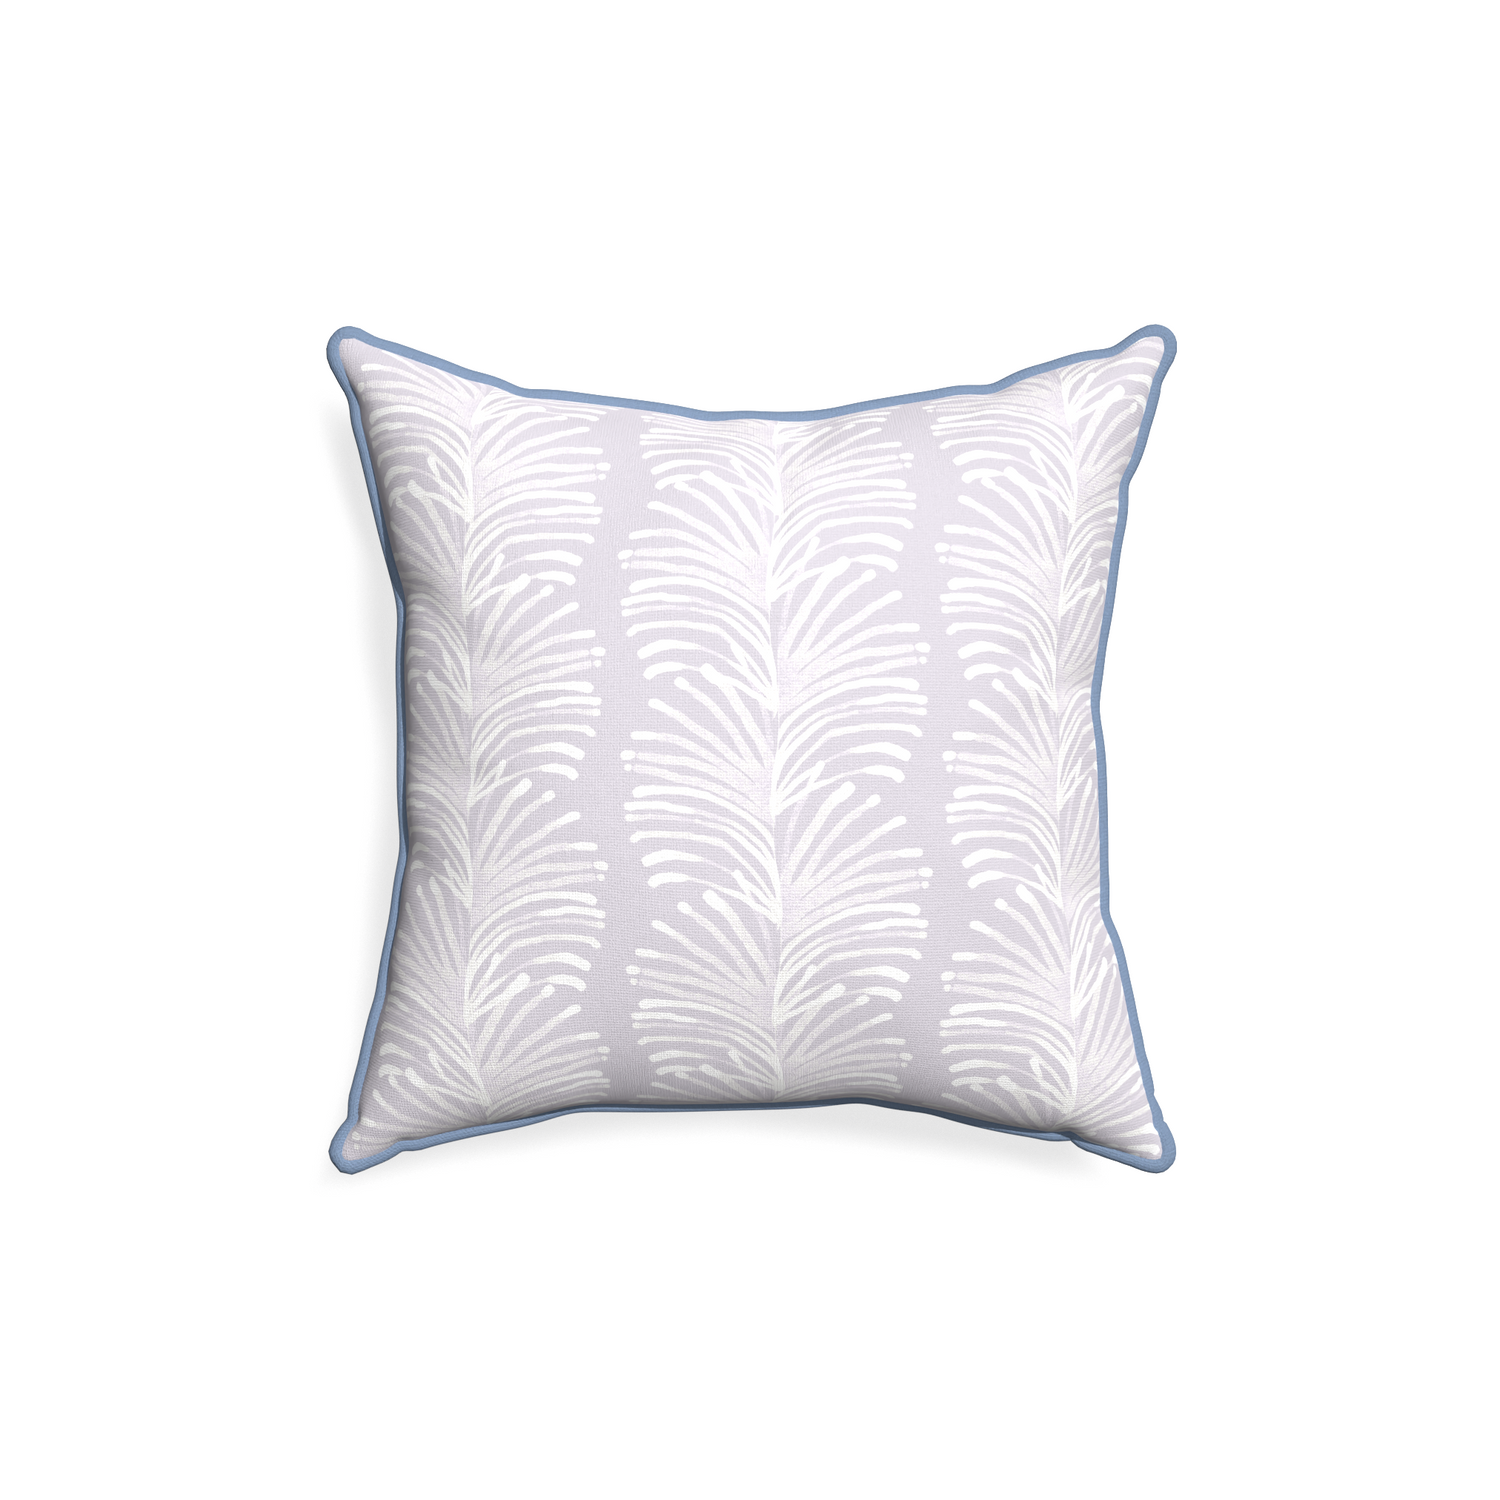 18-square emma lavender custom pillow with sky piping on white background